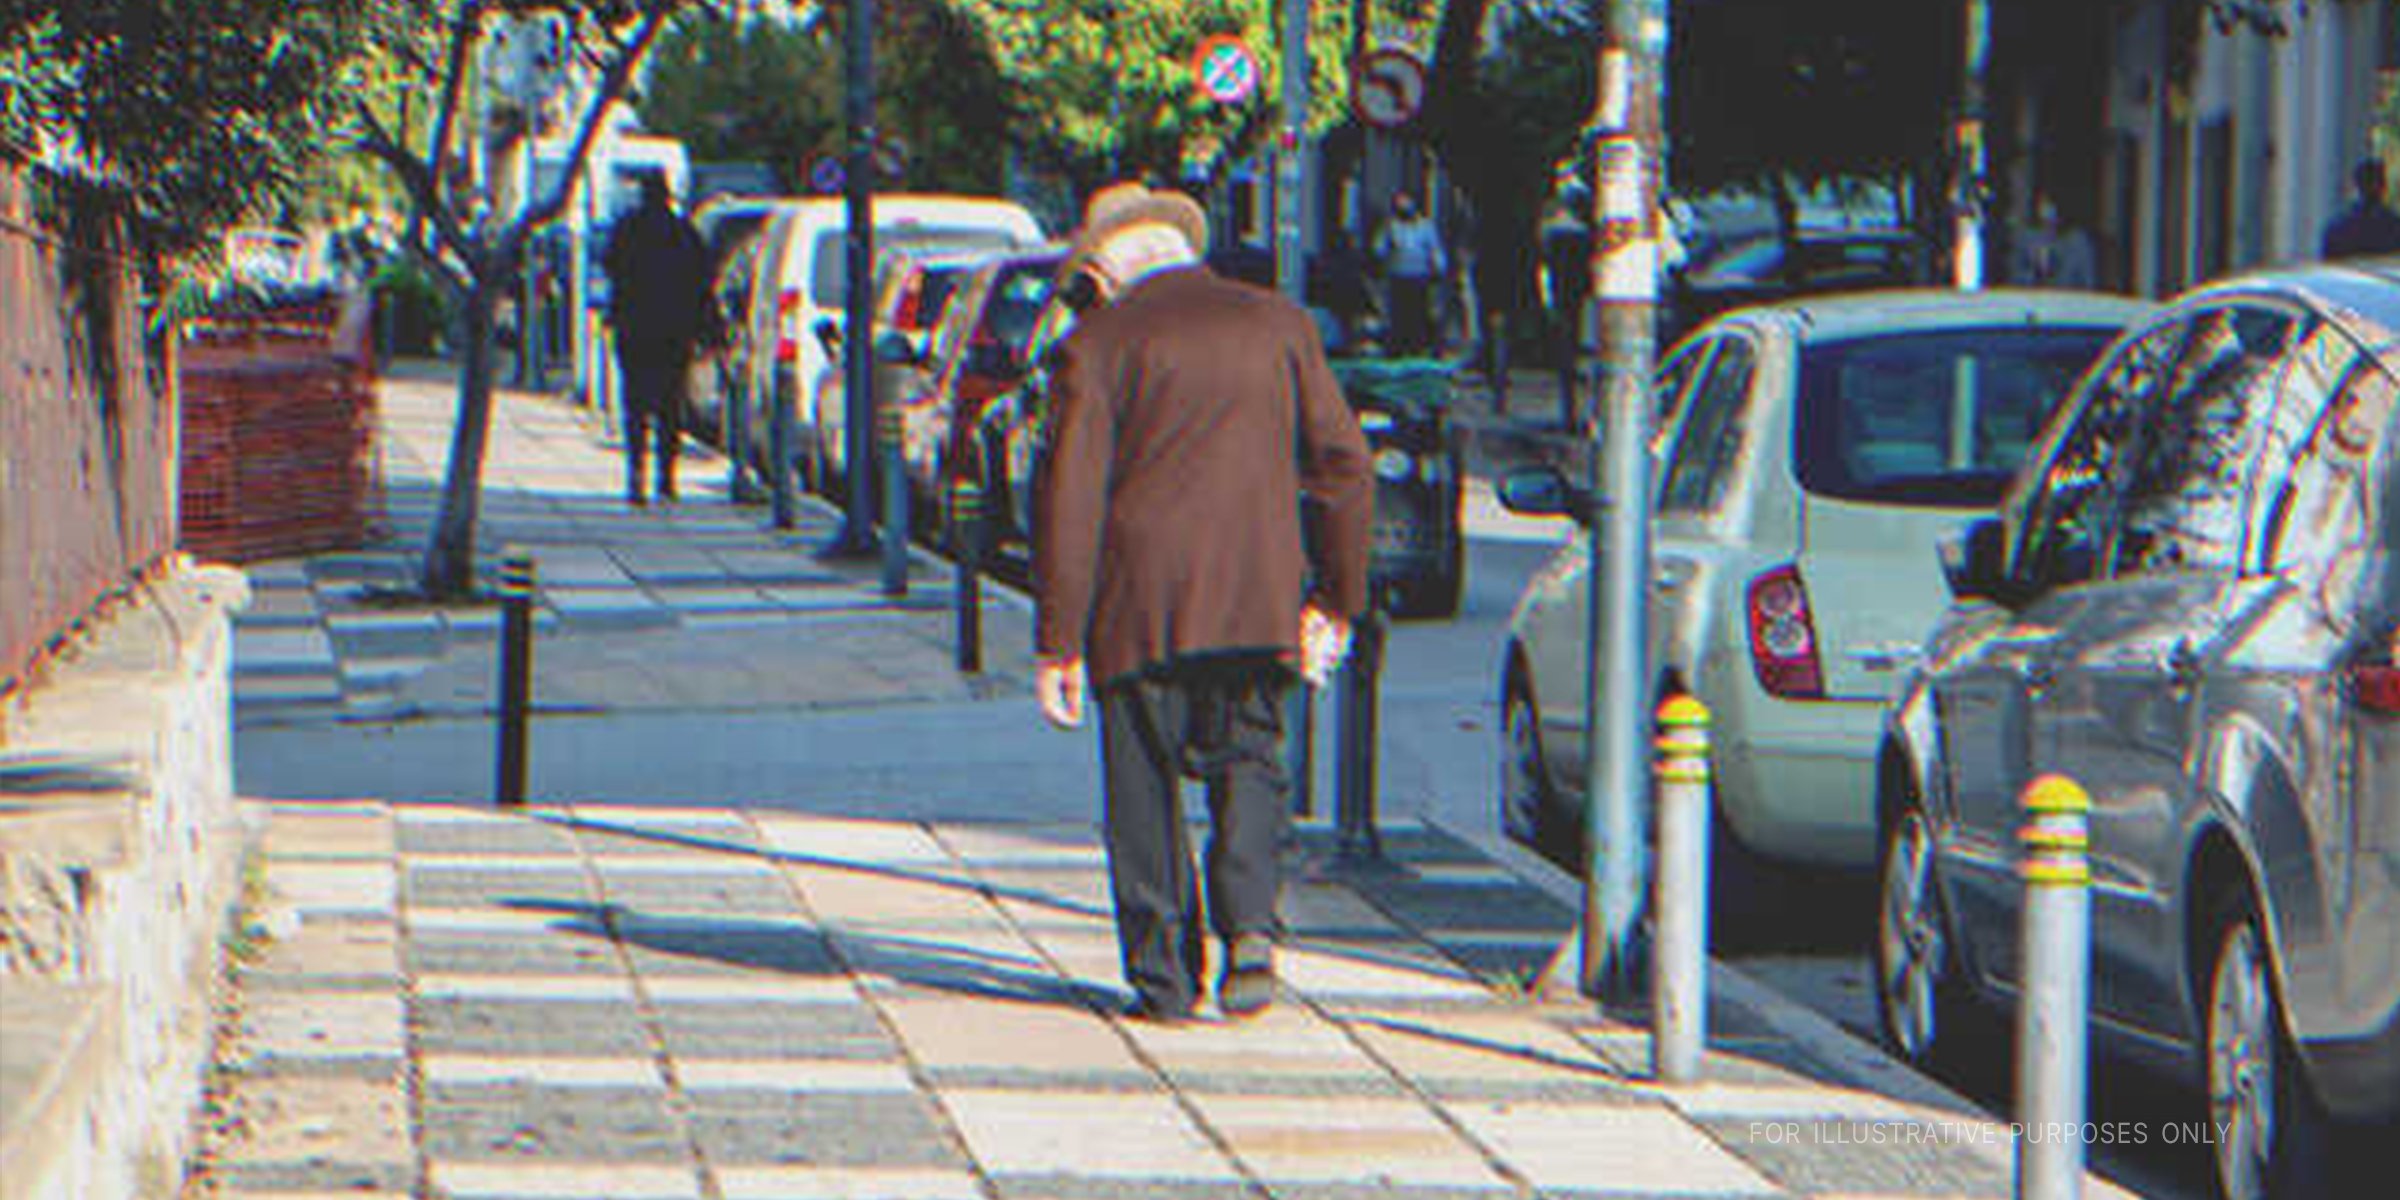 An old man on the street | Source: Shutterstock